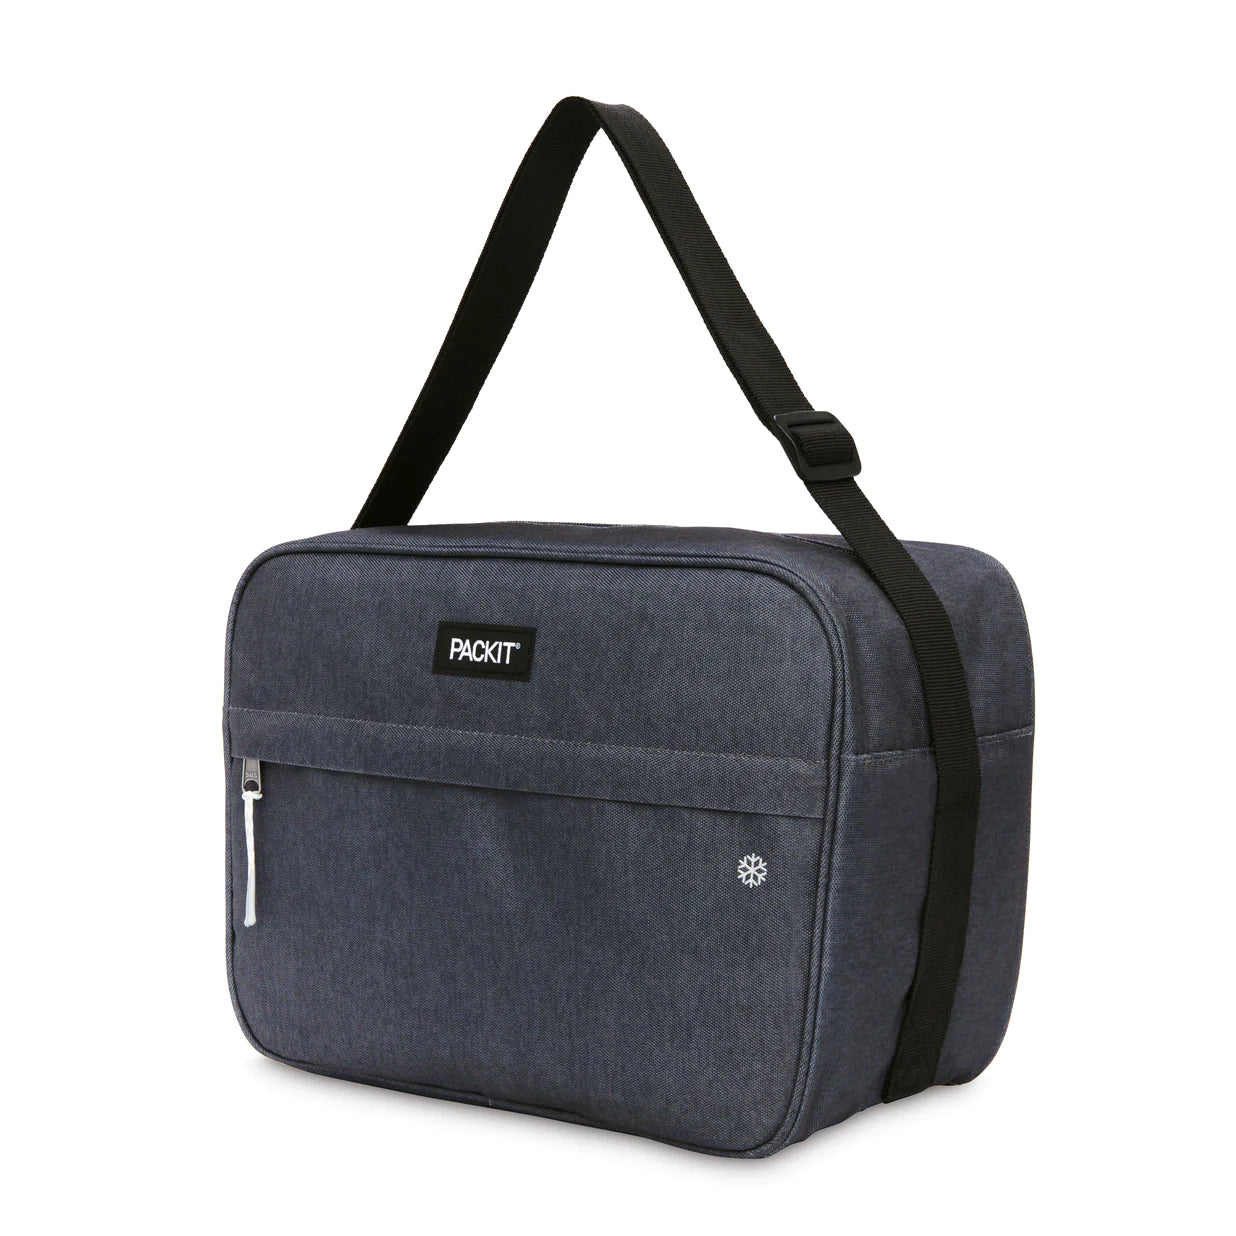 Packit Zuma 15can Cooler Bag by ERGO | Purchase at The Green Collective